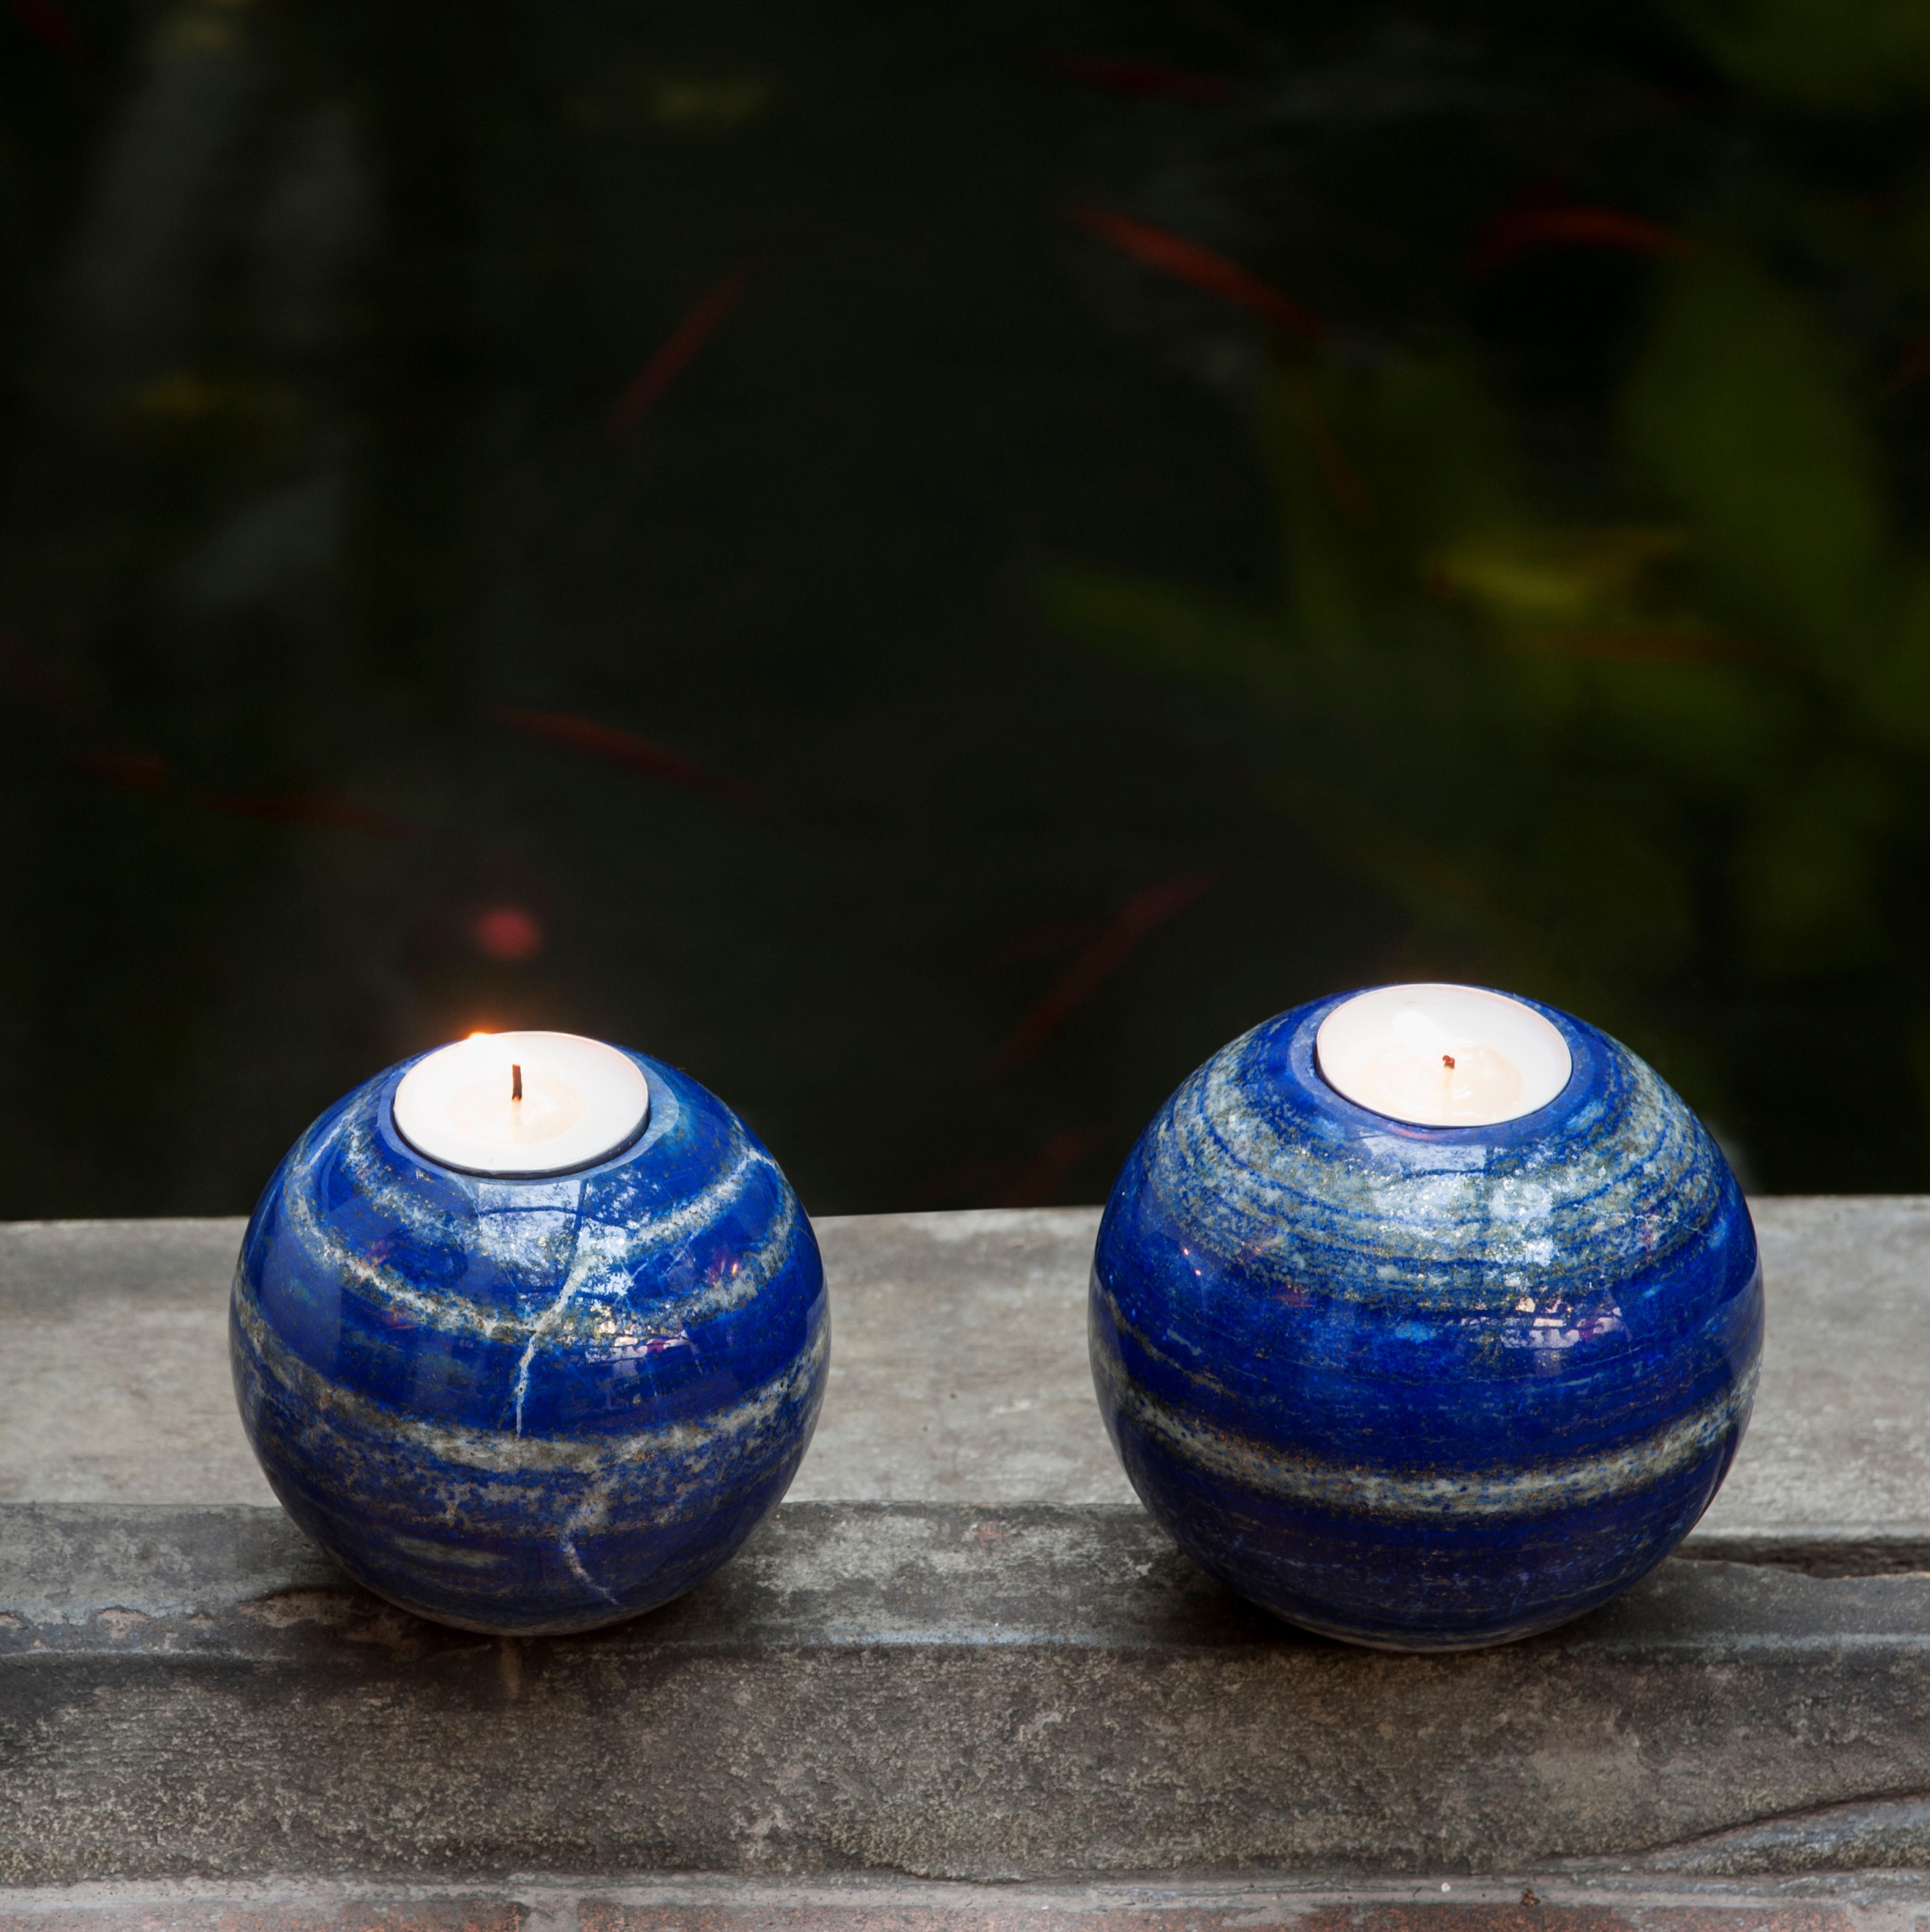 Majorelle candleholder by Studio Lel
Dimensions: D 10 x H 9 cm / D 9 x H 9 cm
Materials: Lapis Lazuli

Lél is an artistic collective dedicated to preserving and evolving the 16th century Florentine and Mughal art of hand-crafted stone inlay.